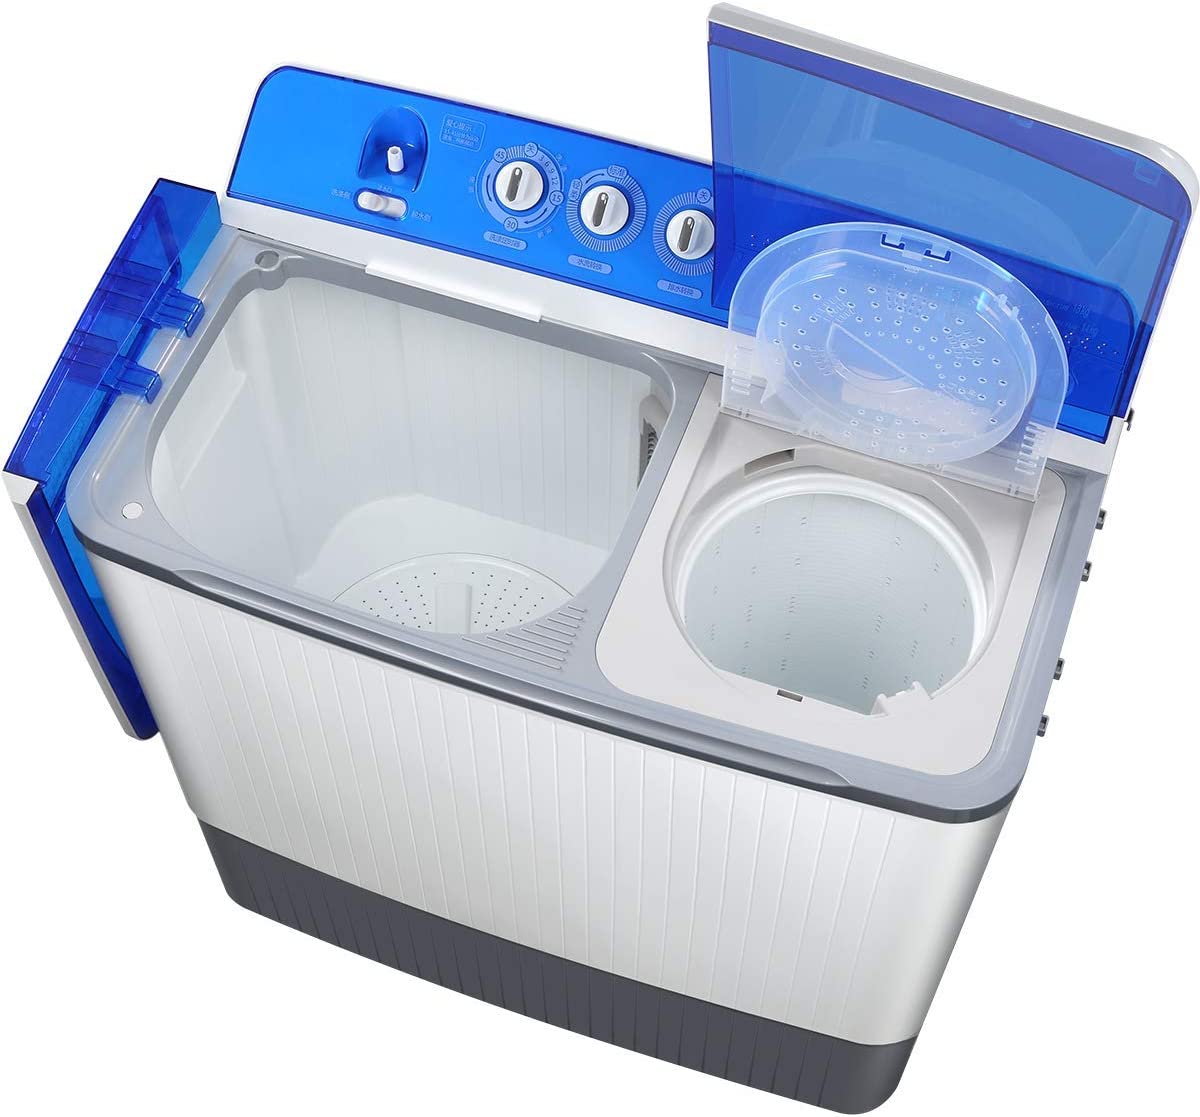 Haier Top Load Semi Automatic Washer White | Washing Machine | Best Washer in Bahrain | Halabh.com